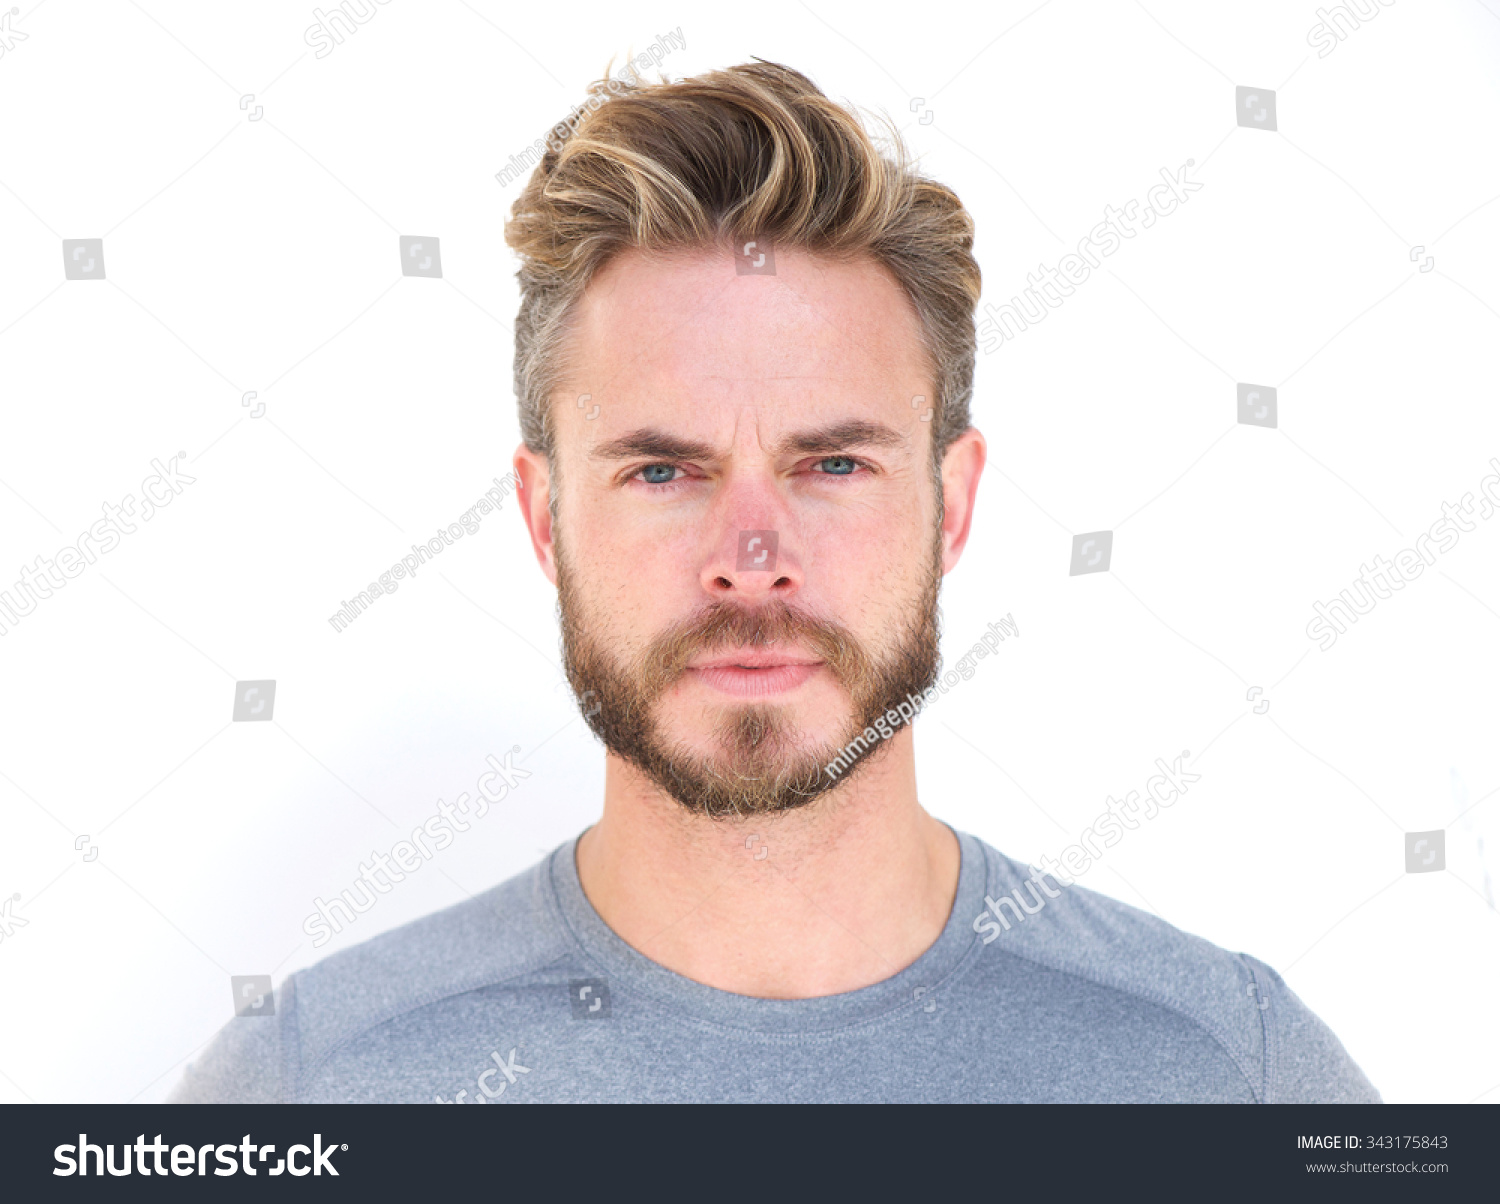 Brown man with blonde hair and beard - wide 3